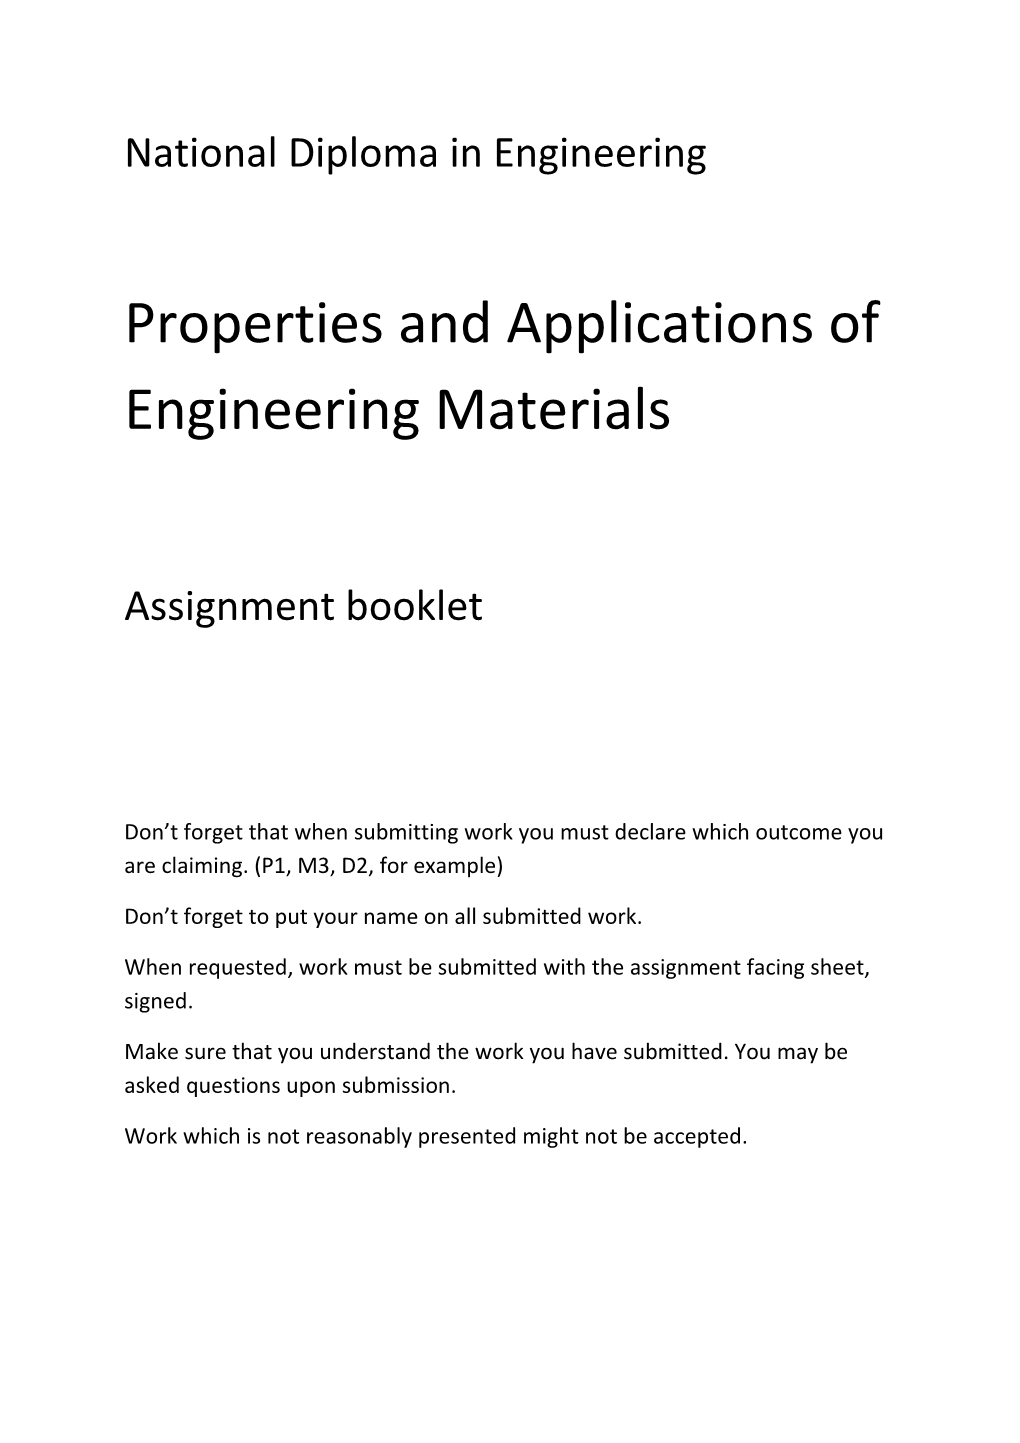 Properties and Applications of Engineering Materials